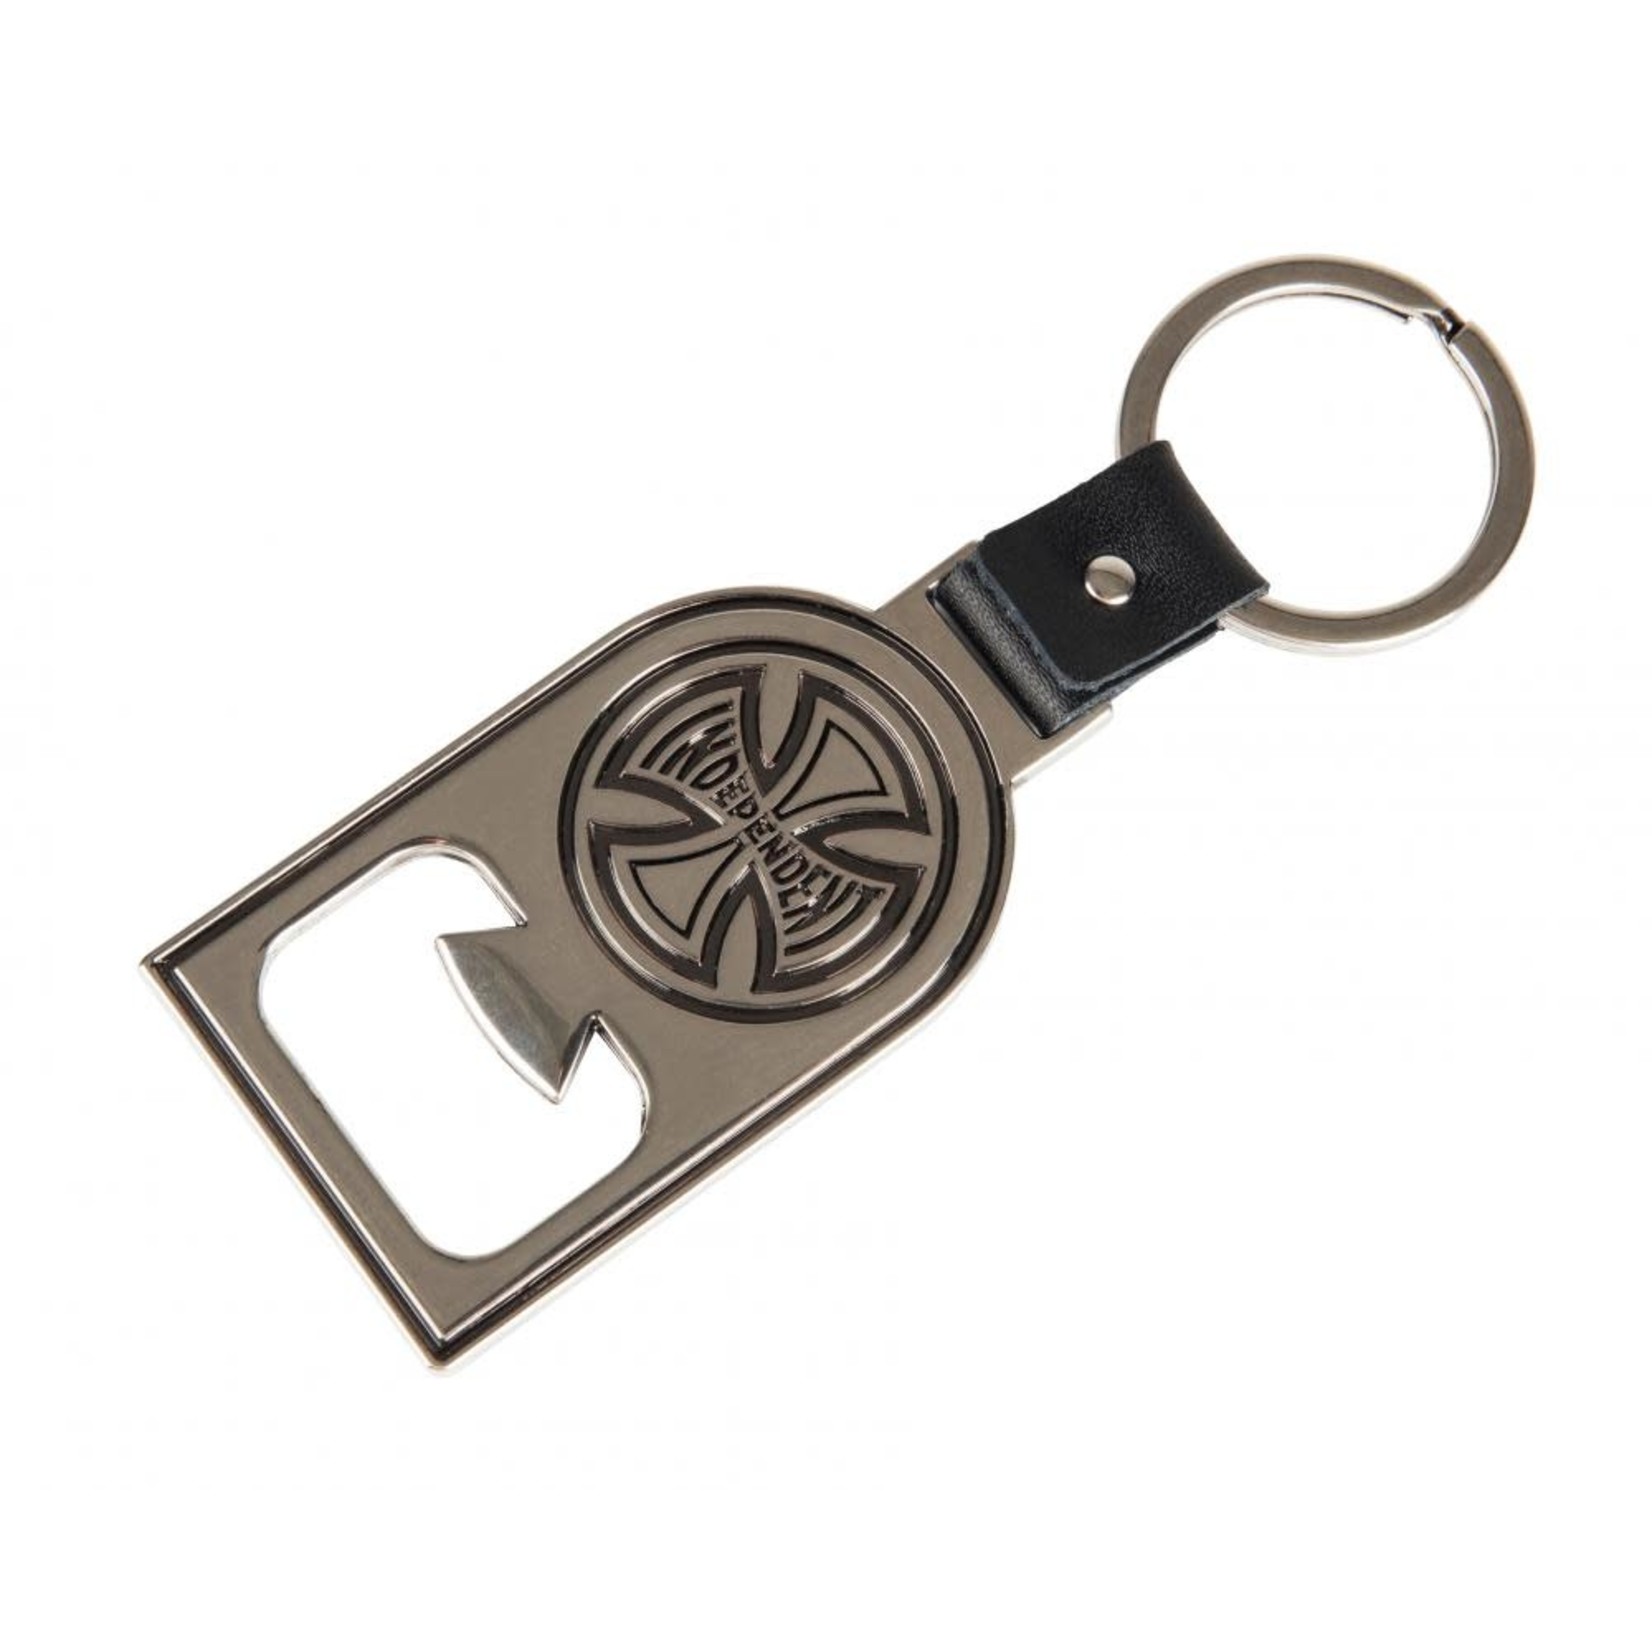 INDEPENDENT Independent Truck Co. Bottle Opener Keychain